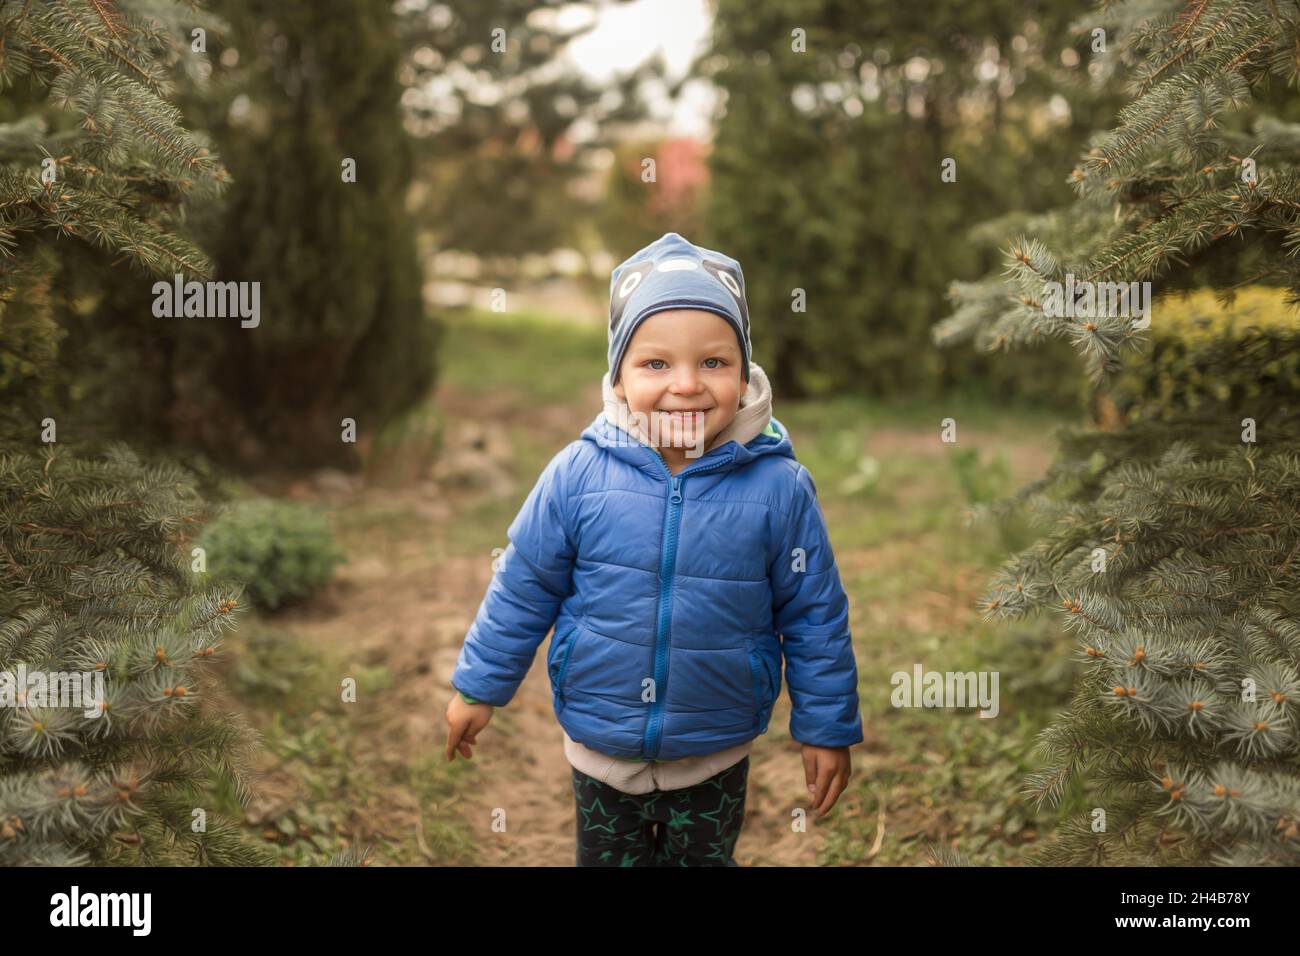 Small boy in blue clothes in garden smiling Stock Photo